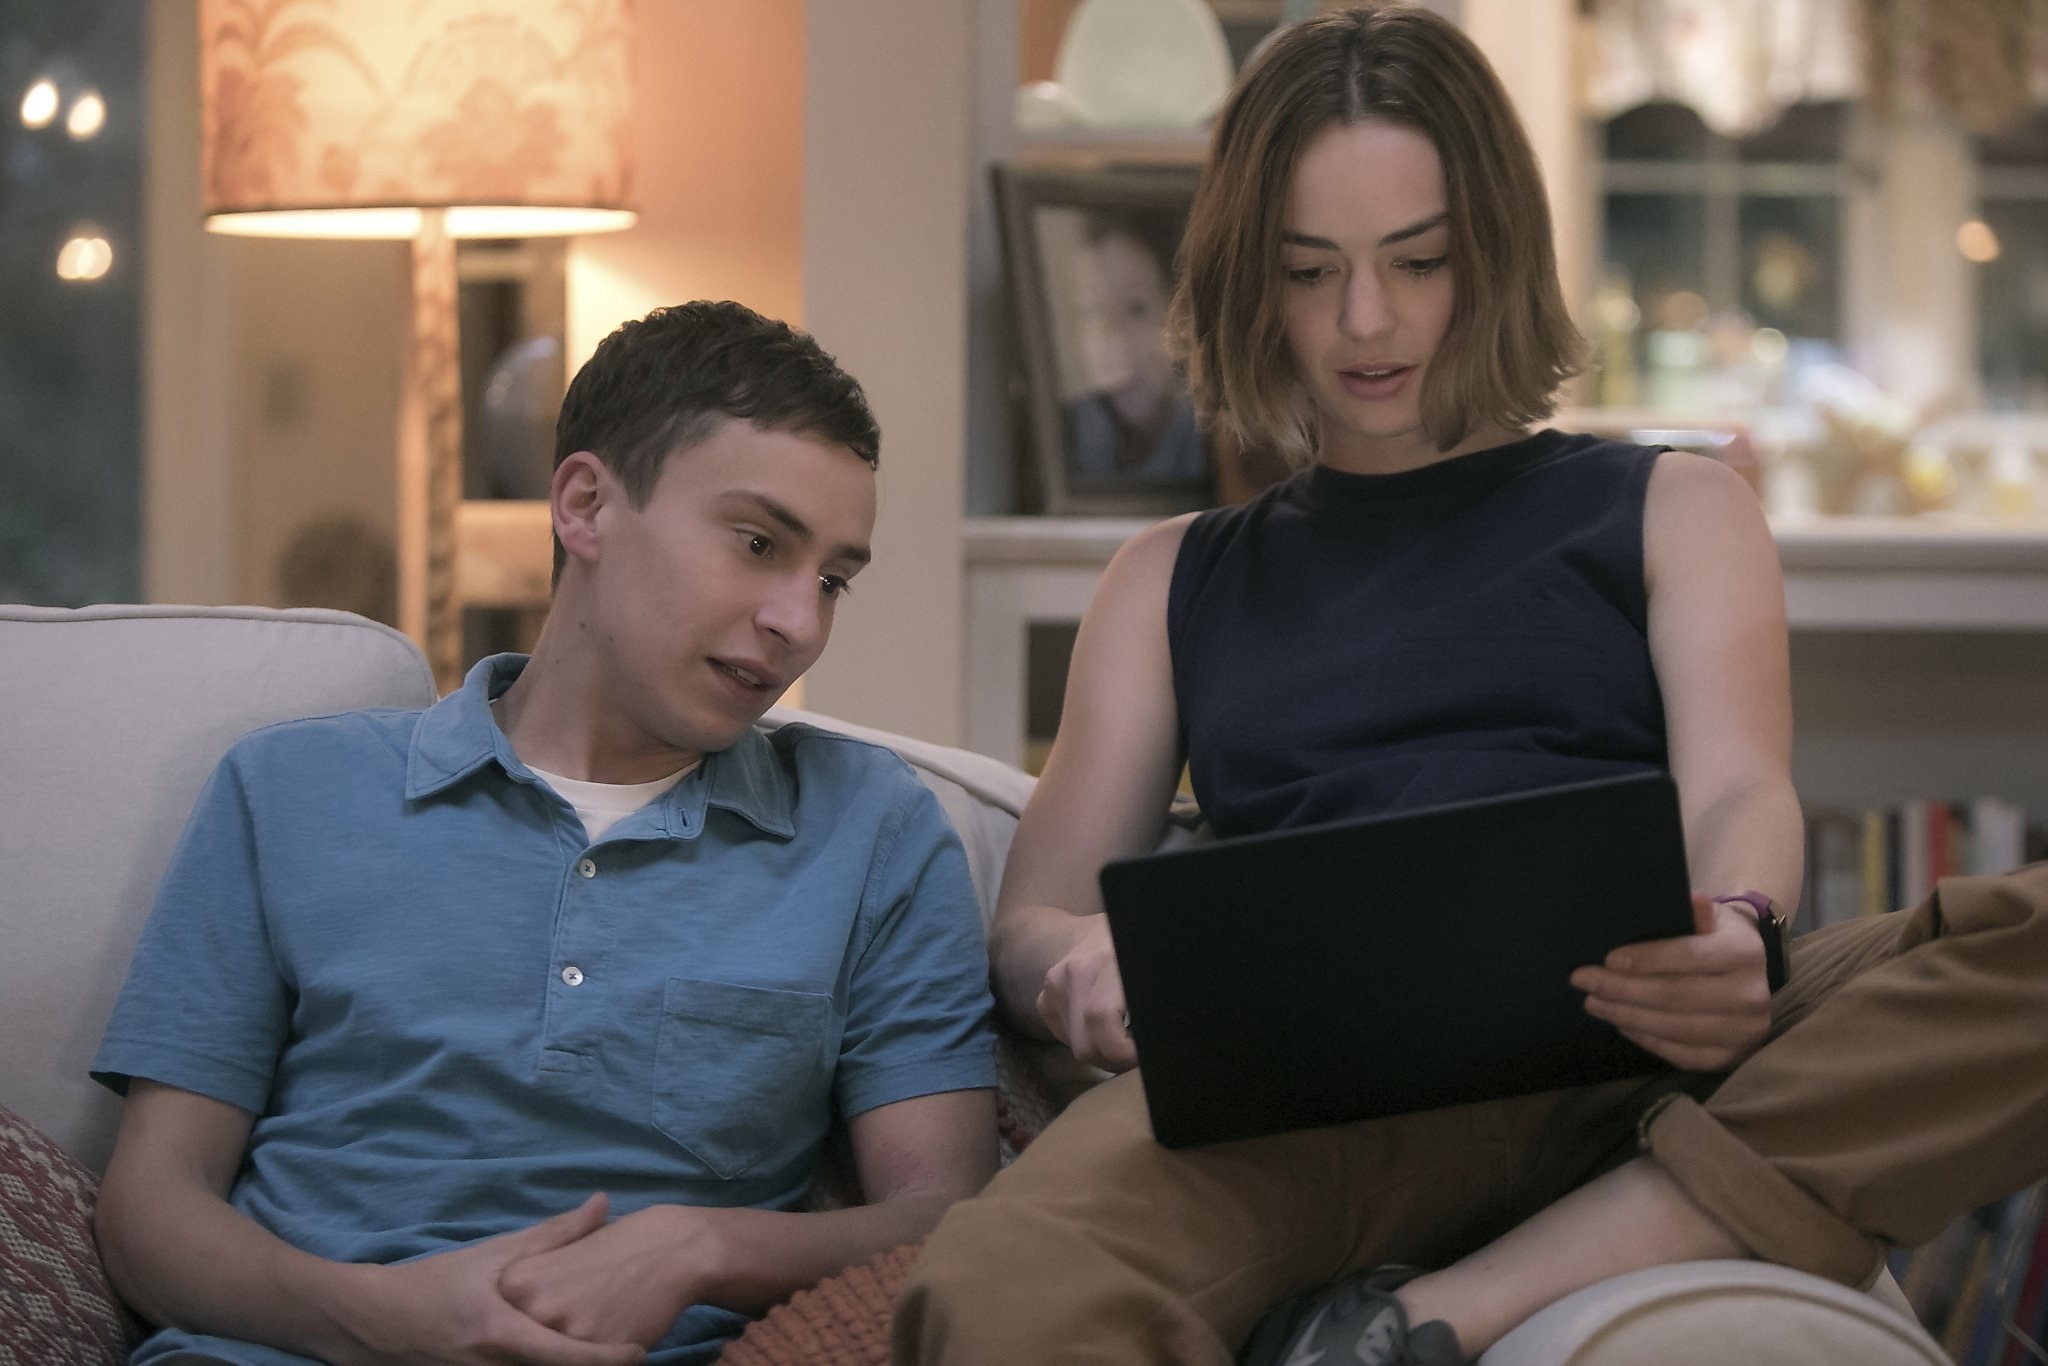 two of the characters looking at a tablet while sitting on the couch